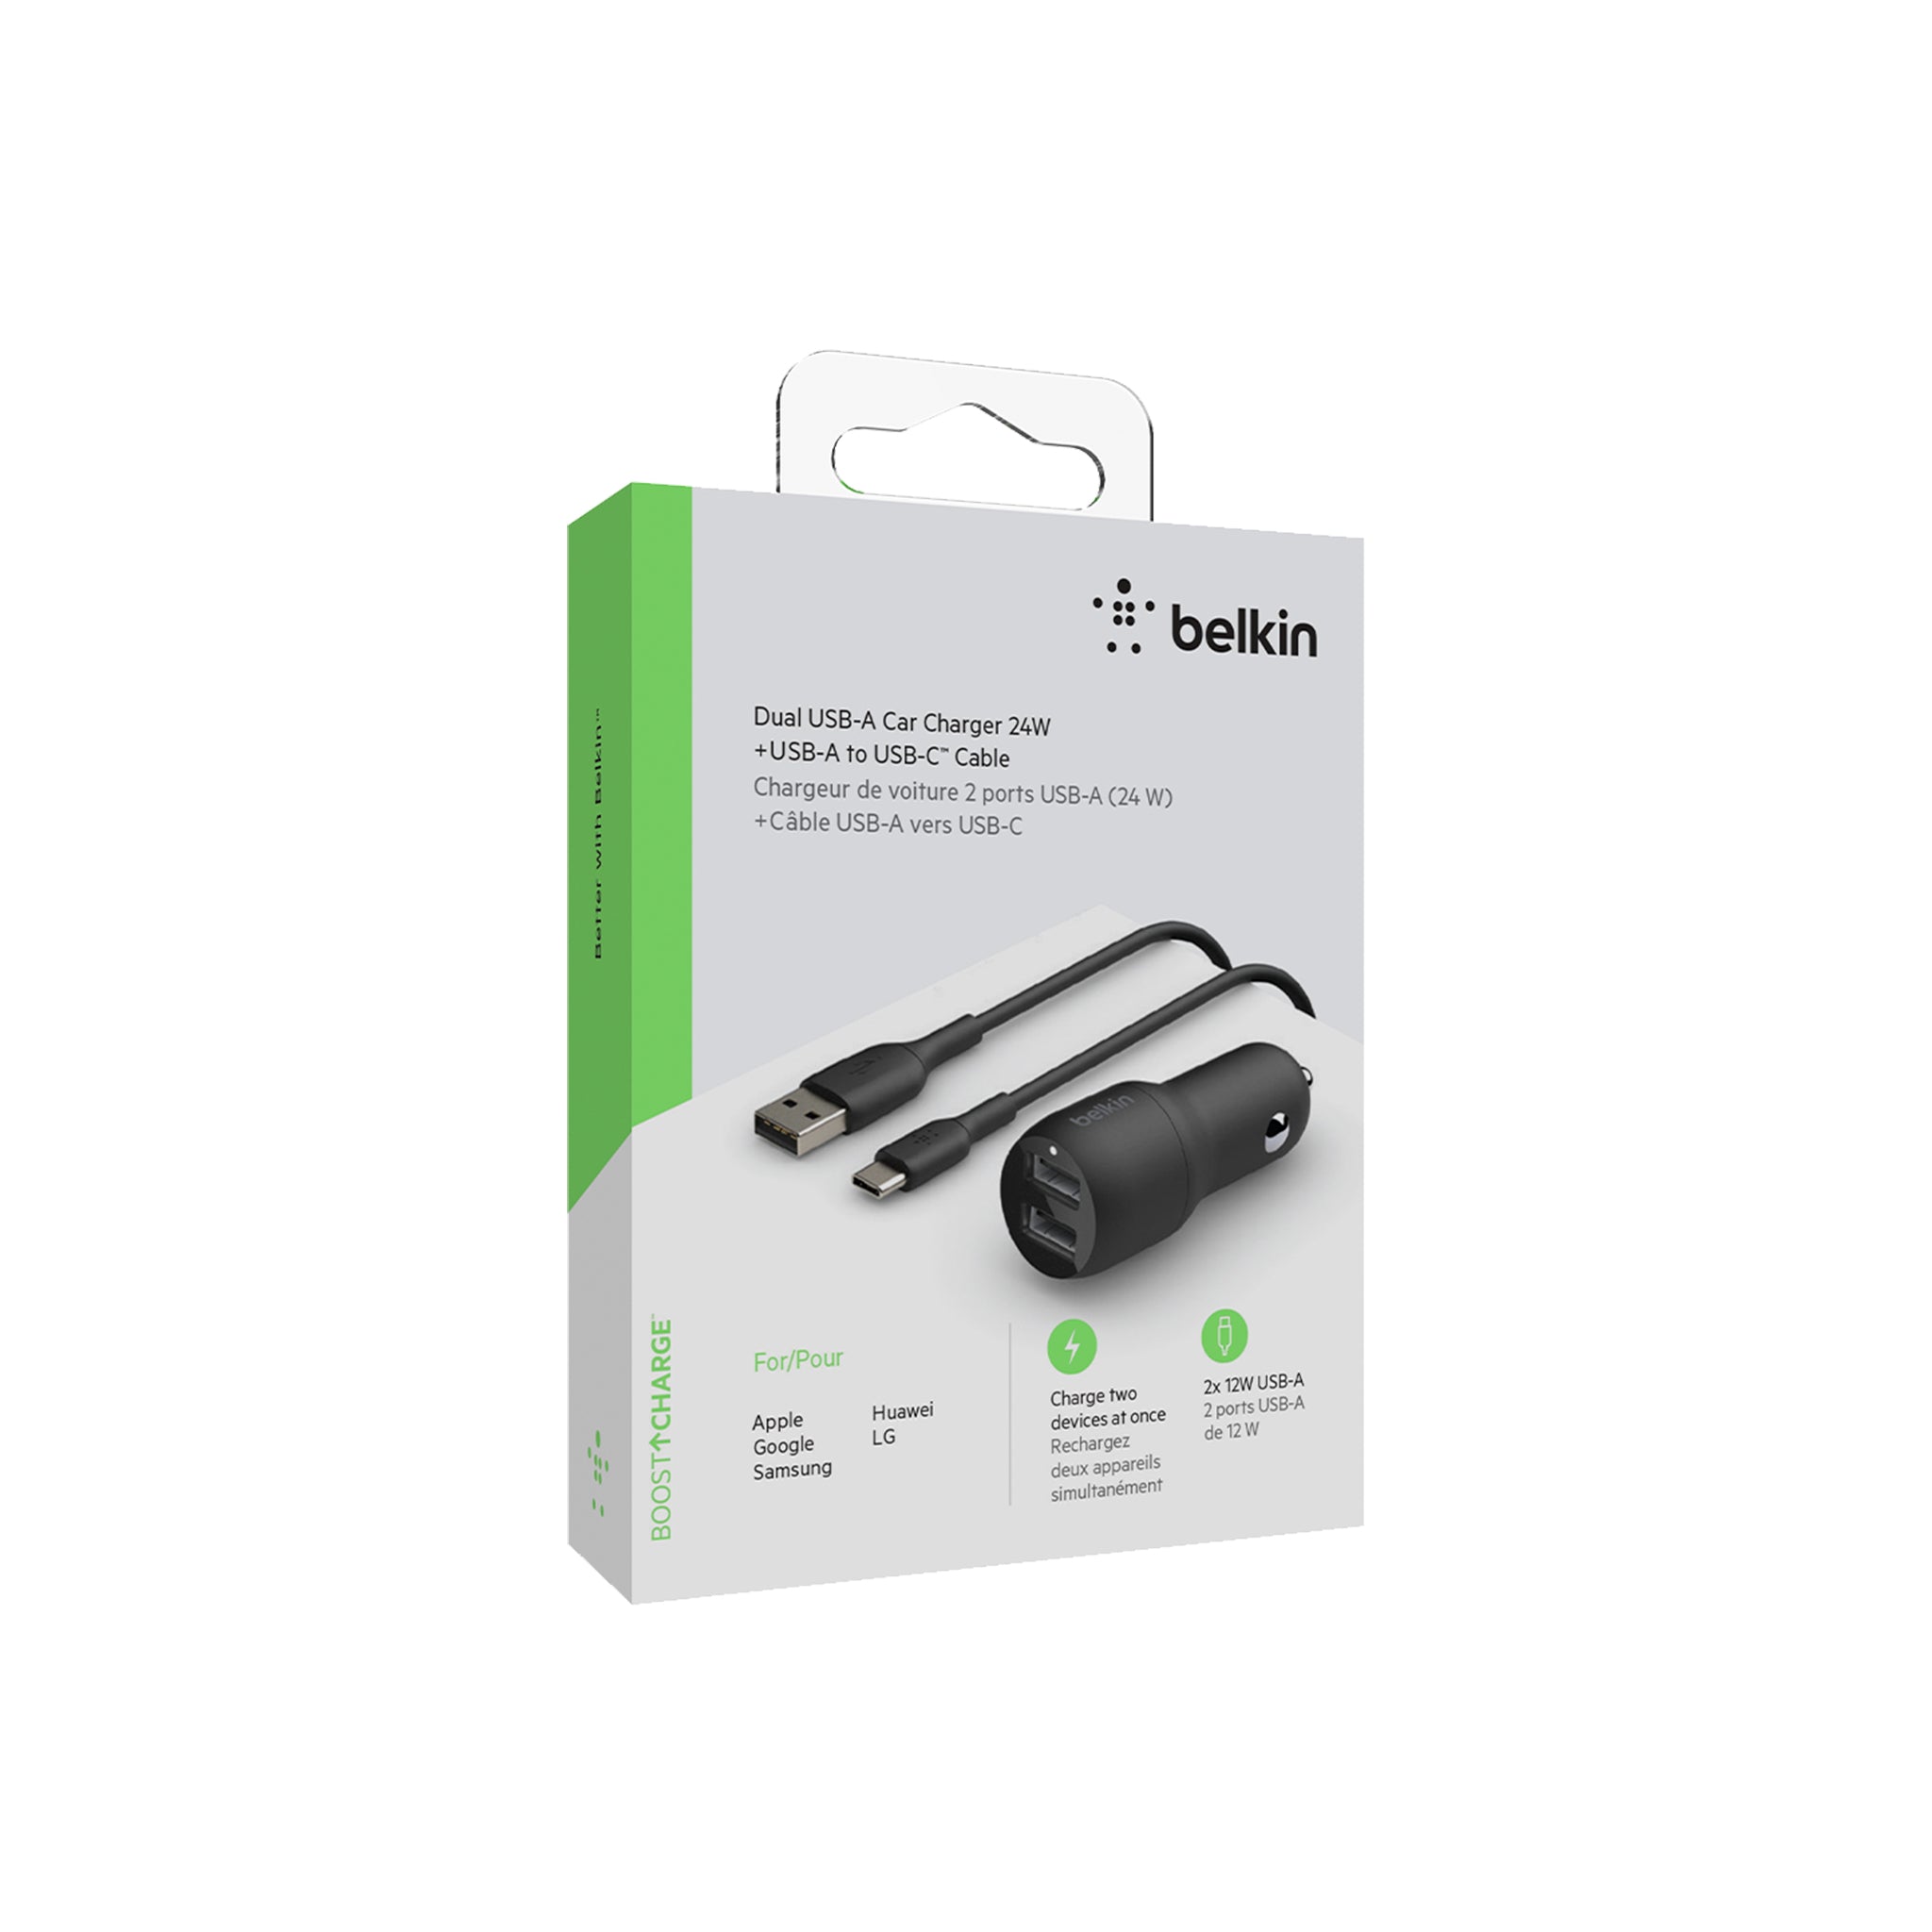 Belkin - Dual Port Usb A Car Charger 24w With Usb A To Usb C Cable 3ft - Black